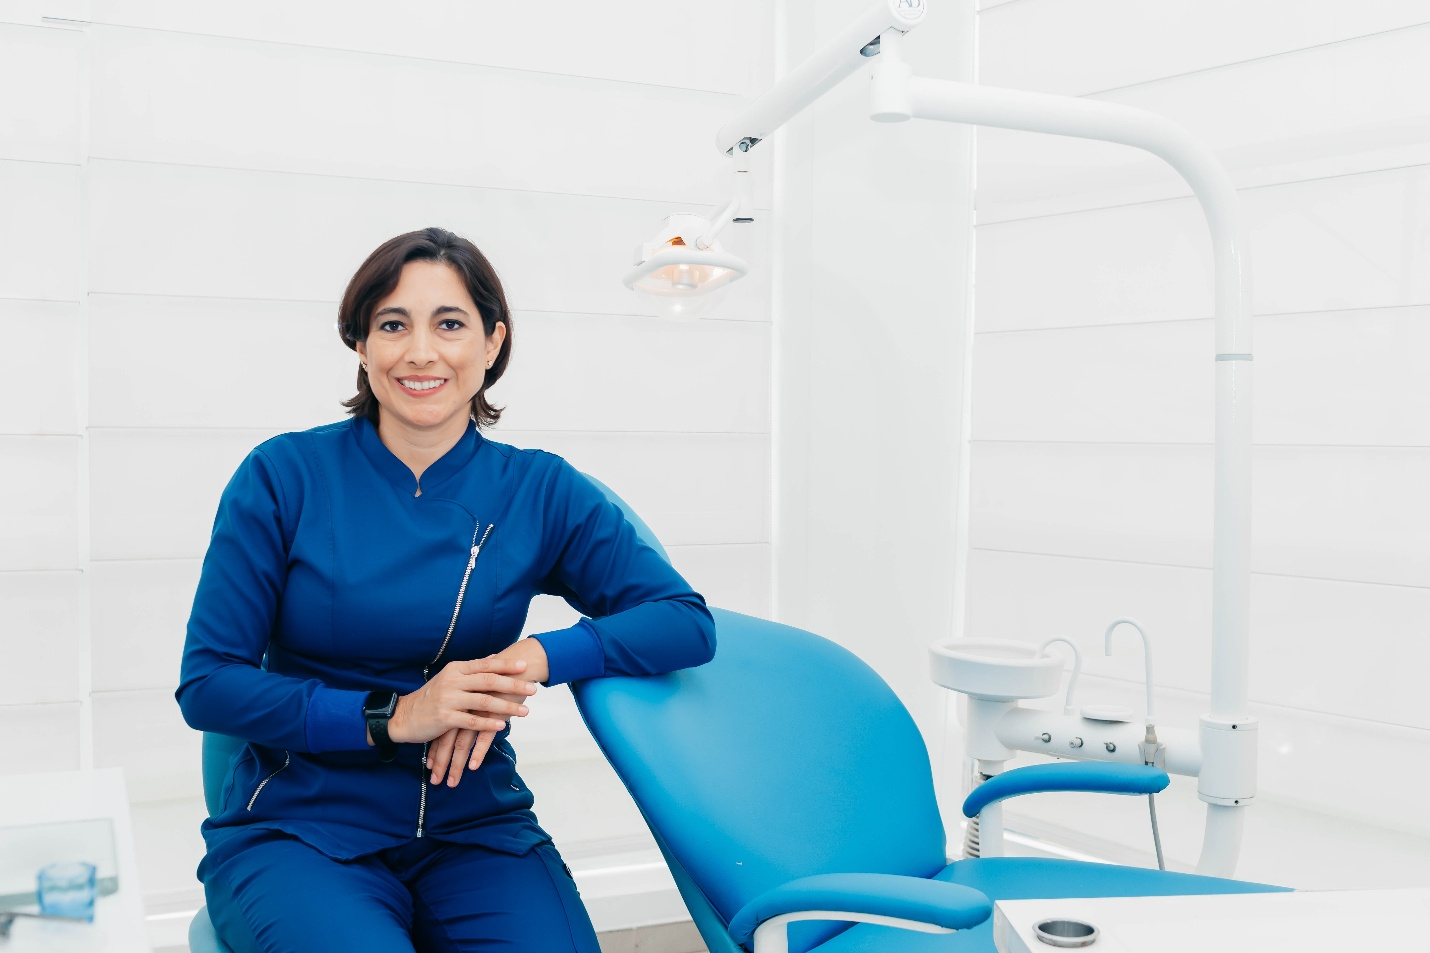 A dentist wearing blue smiling at the camera while sitting beside the dentist’s chair.